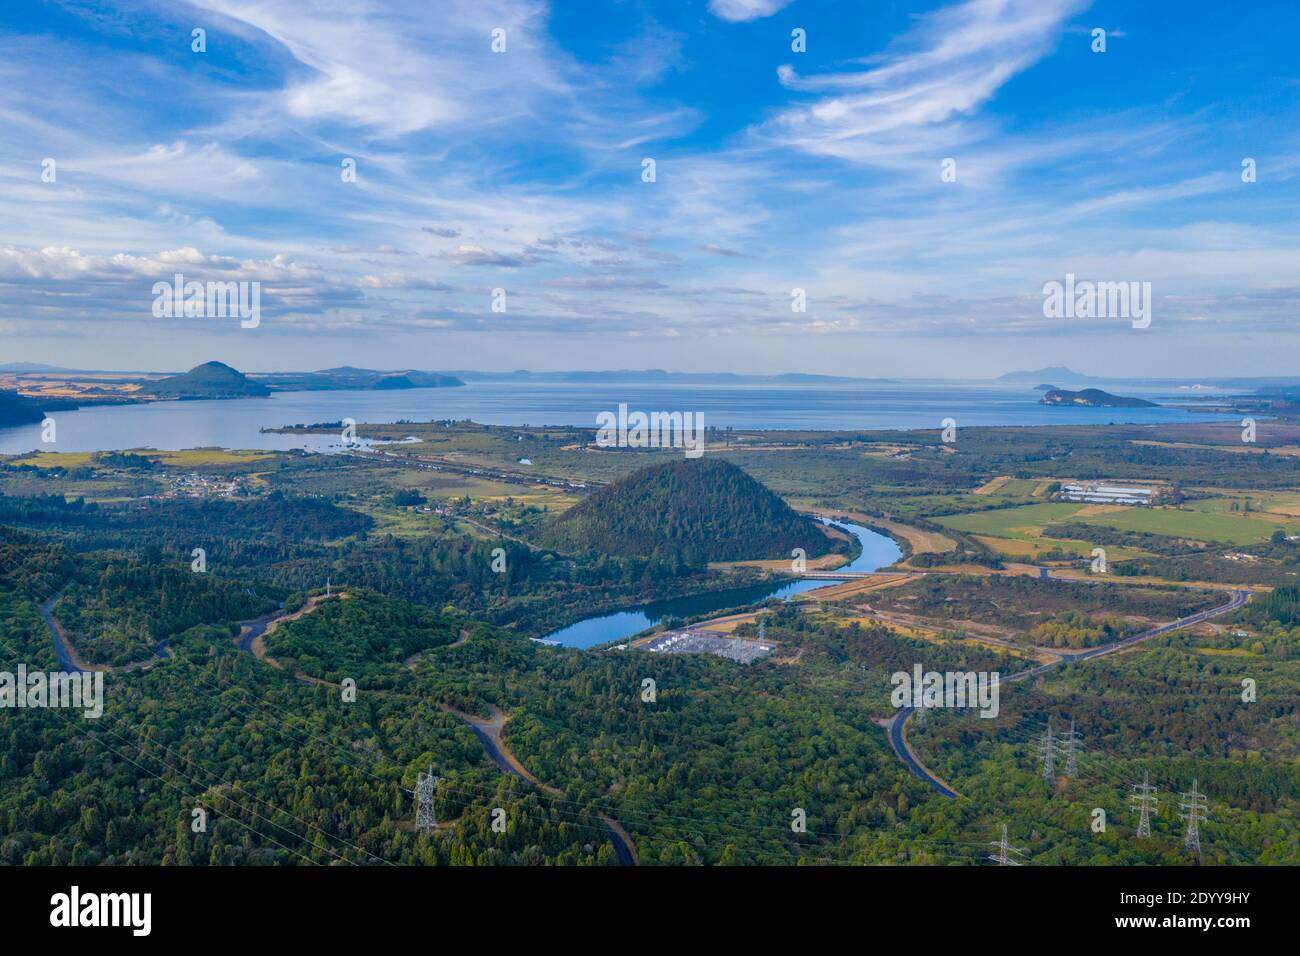 Aerial view of lake Taupo in New Zealand Stock Photo